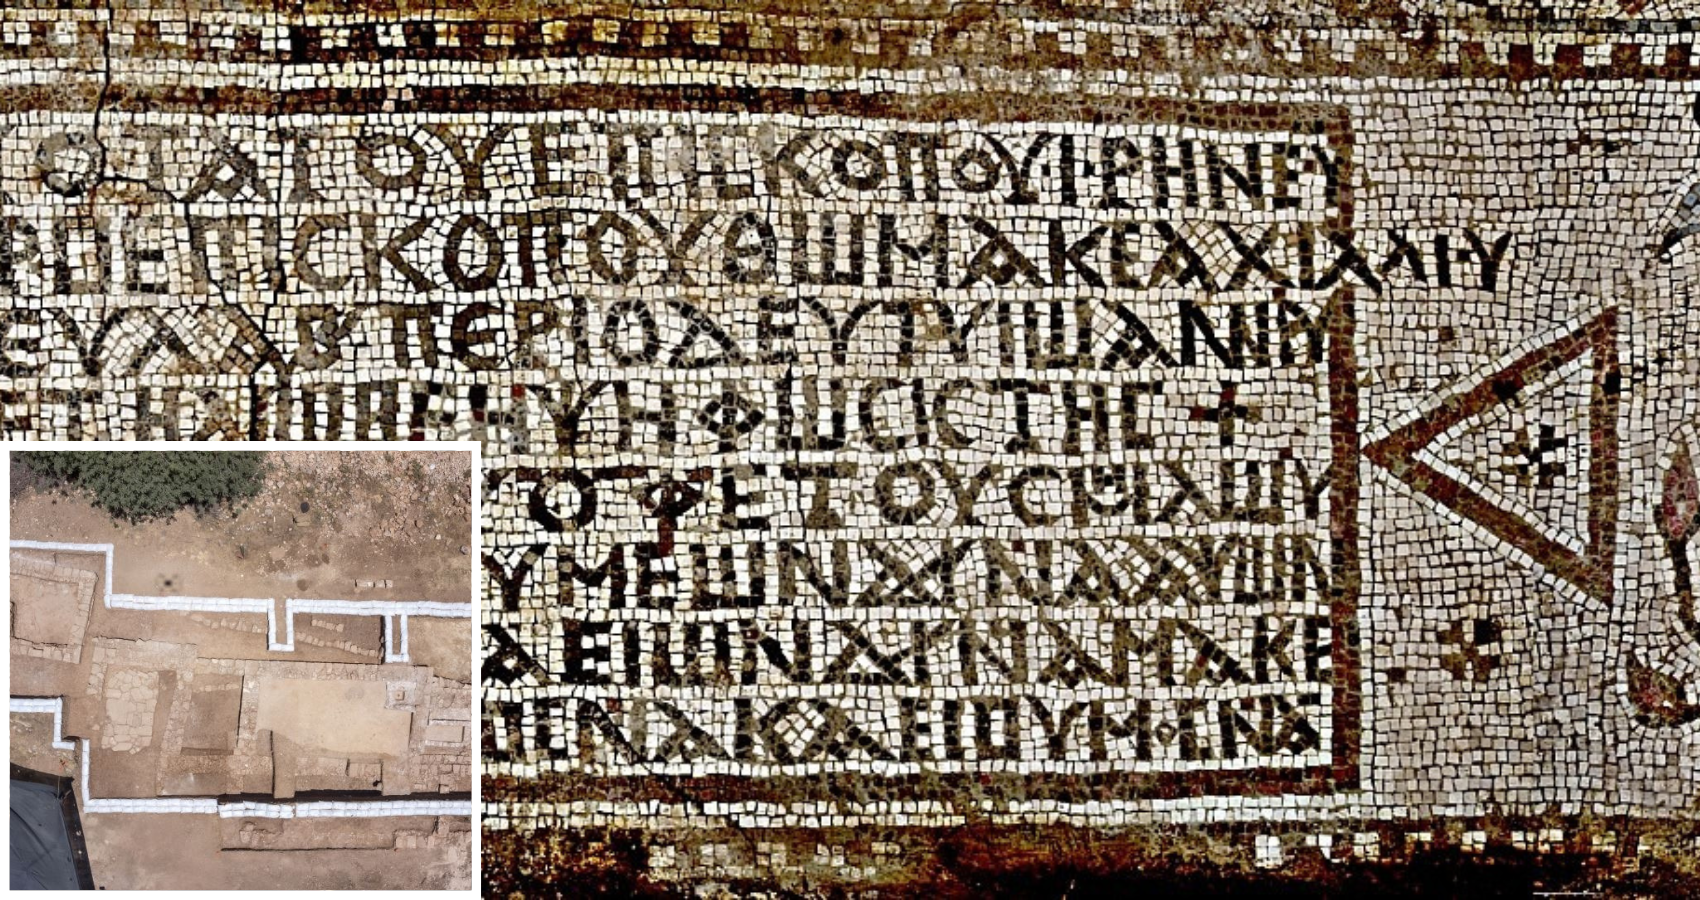 1,600-year-old church mosaic puzzles out key role of women in early Christianity